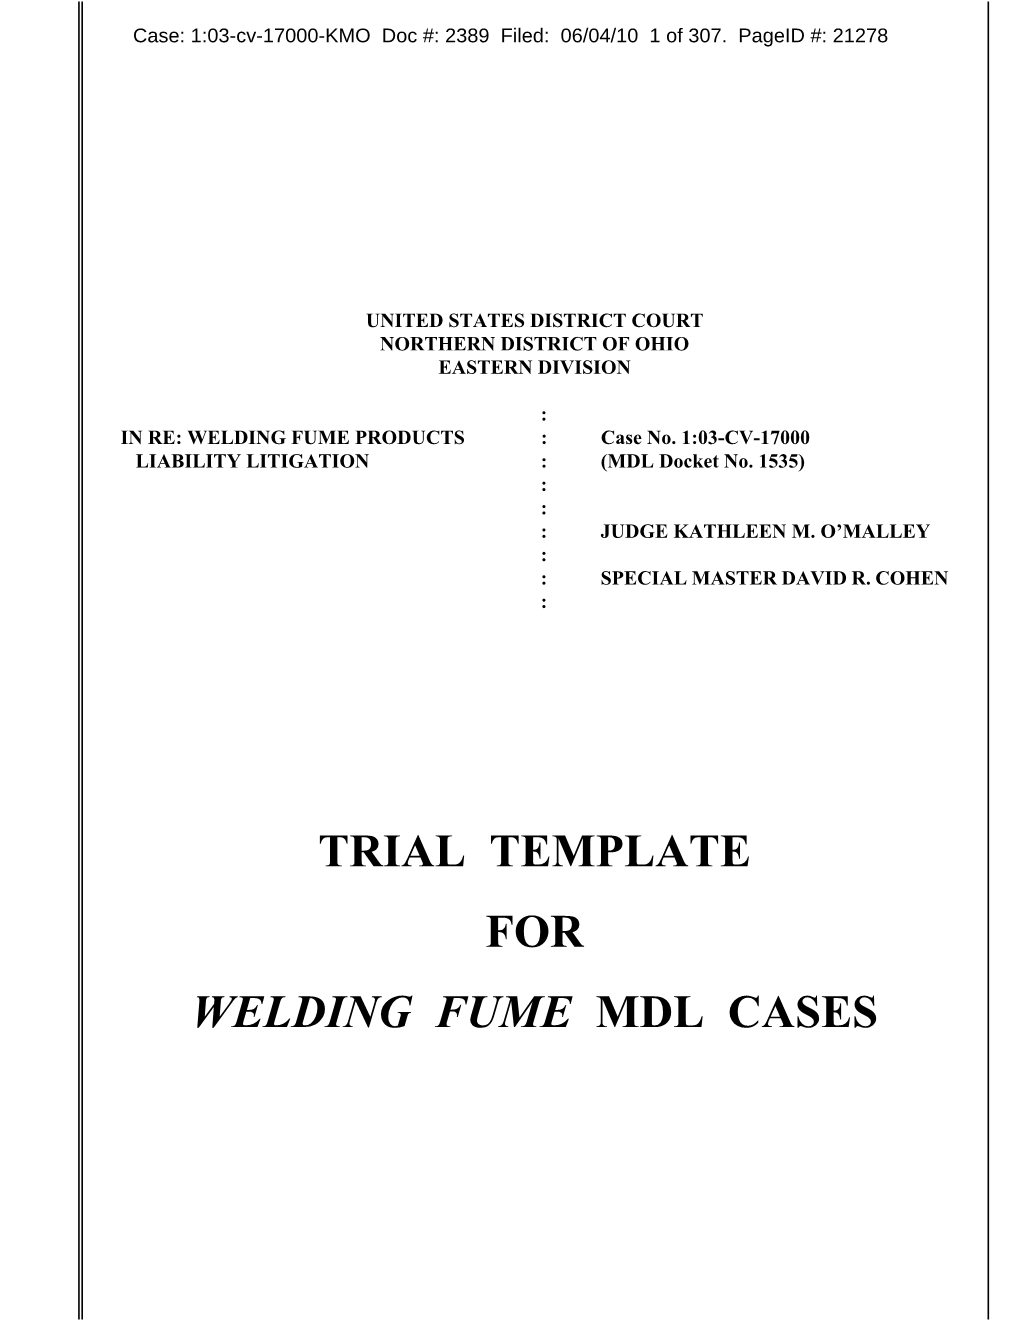 TRIAL TEMPLATE for WELDING FUME MDL CASES Case: 1:03-Cv-17000-KMO Doc #: 2389 Filed: 06/04/10 2 of 307